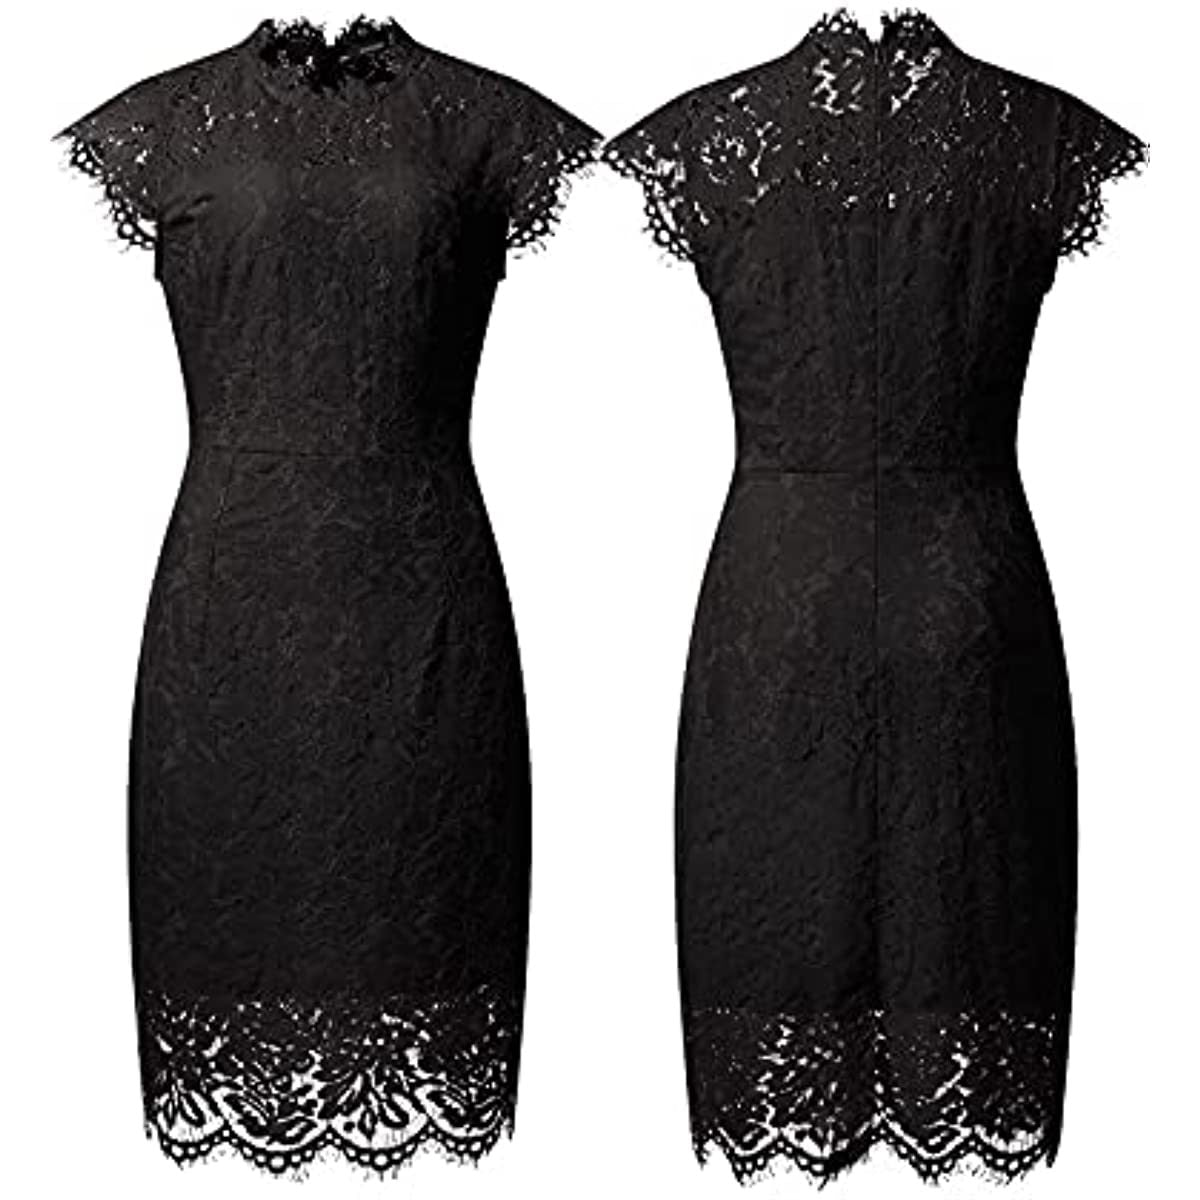 Women's Sleeveless Lace Floral Elegant Cocktail Dress Crew Neck Knee Length for Party